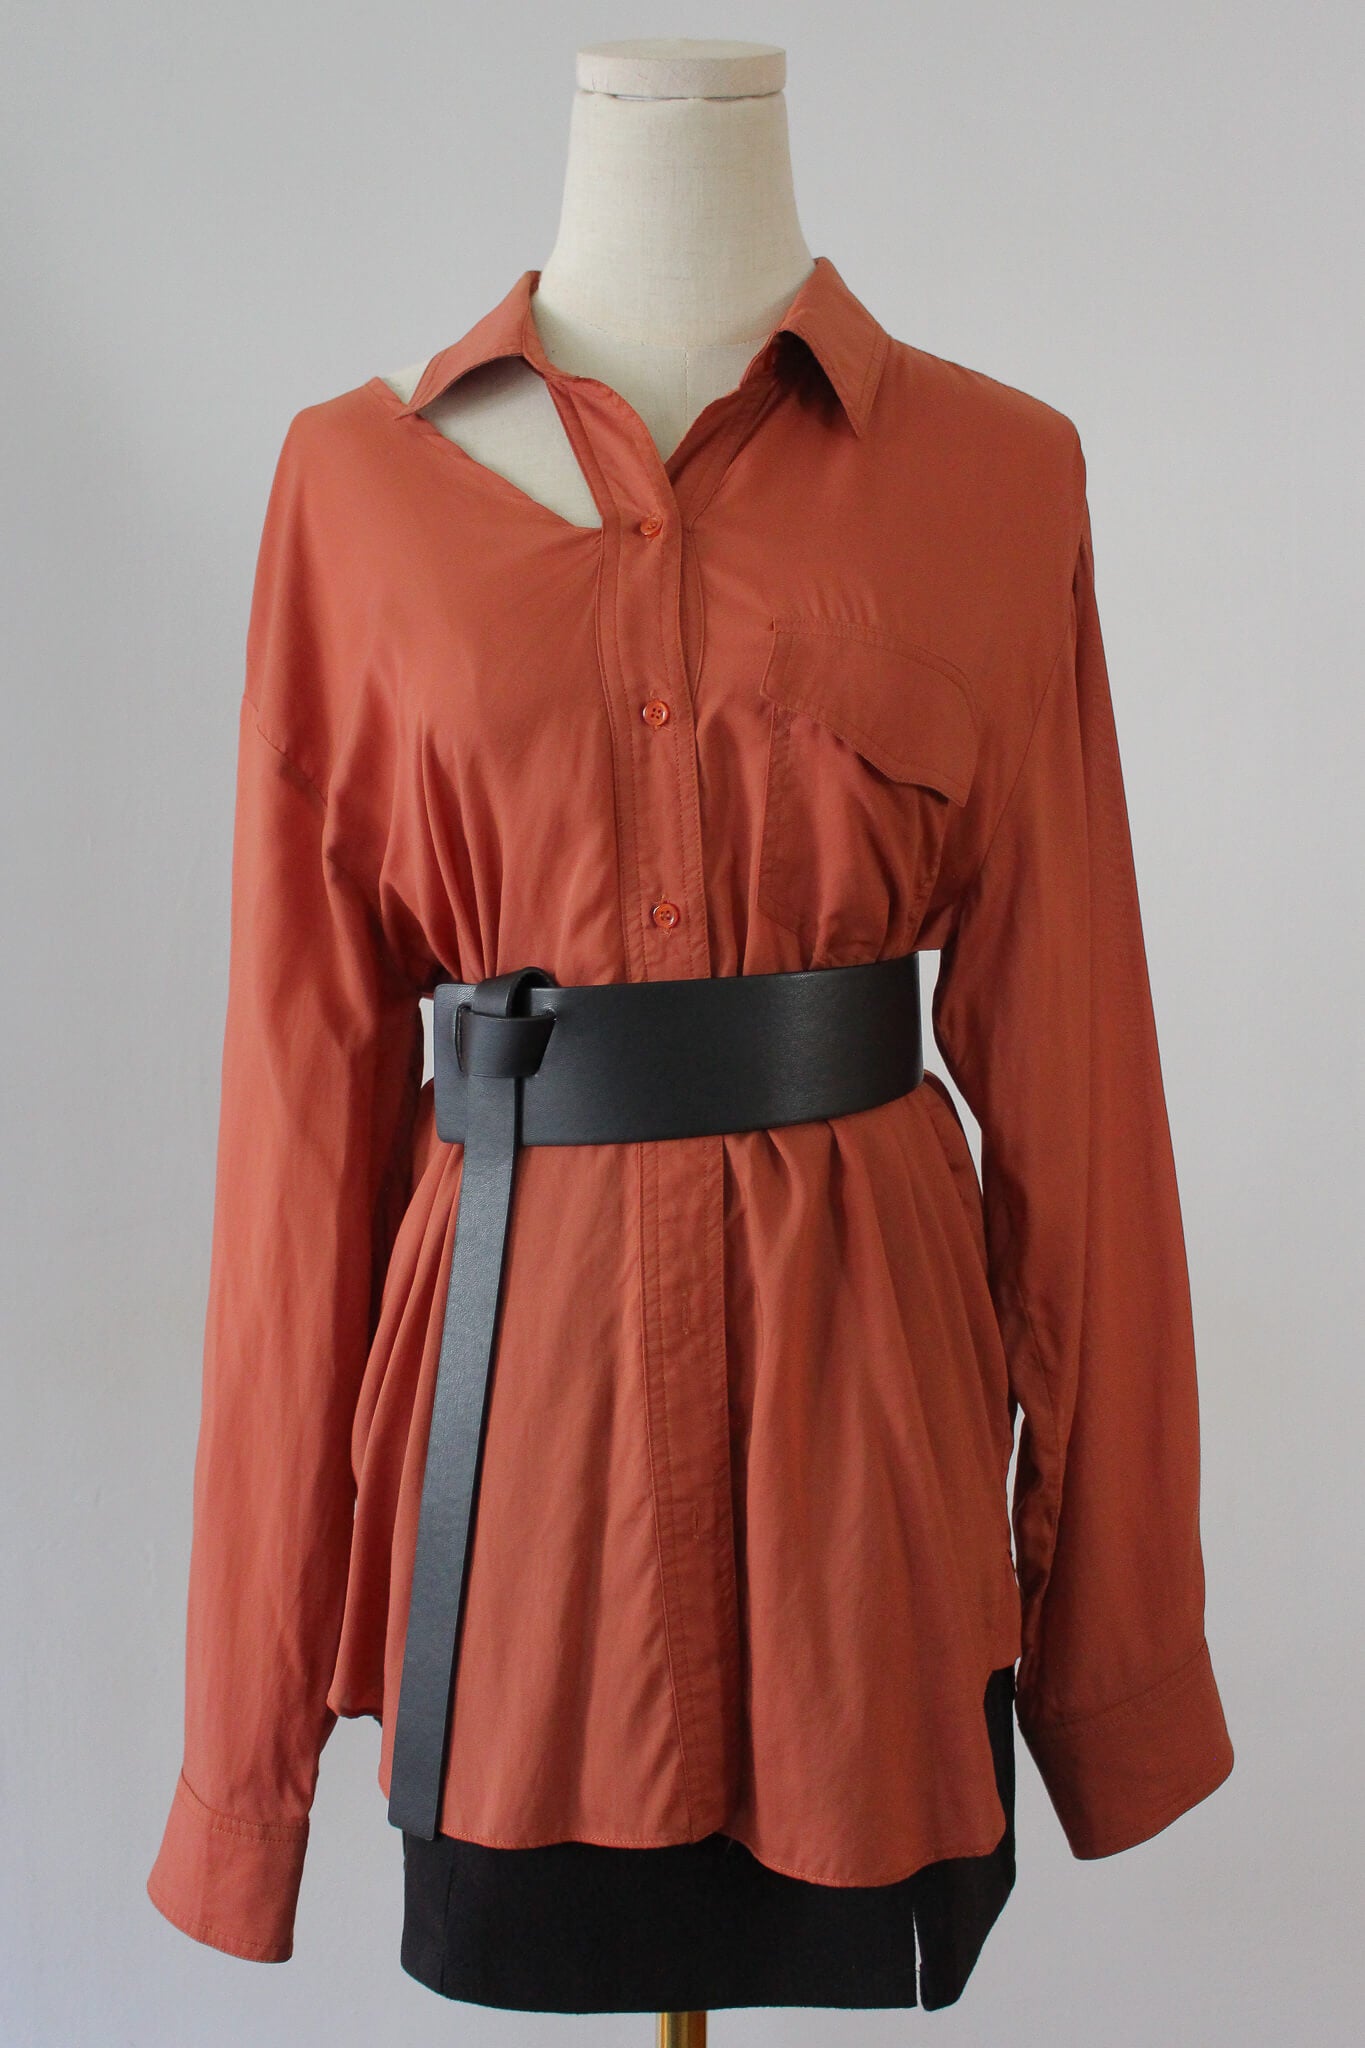 Soft, thin and silky shirt that can be worn as outerwear. Features a cut-out on collarbone area